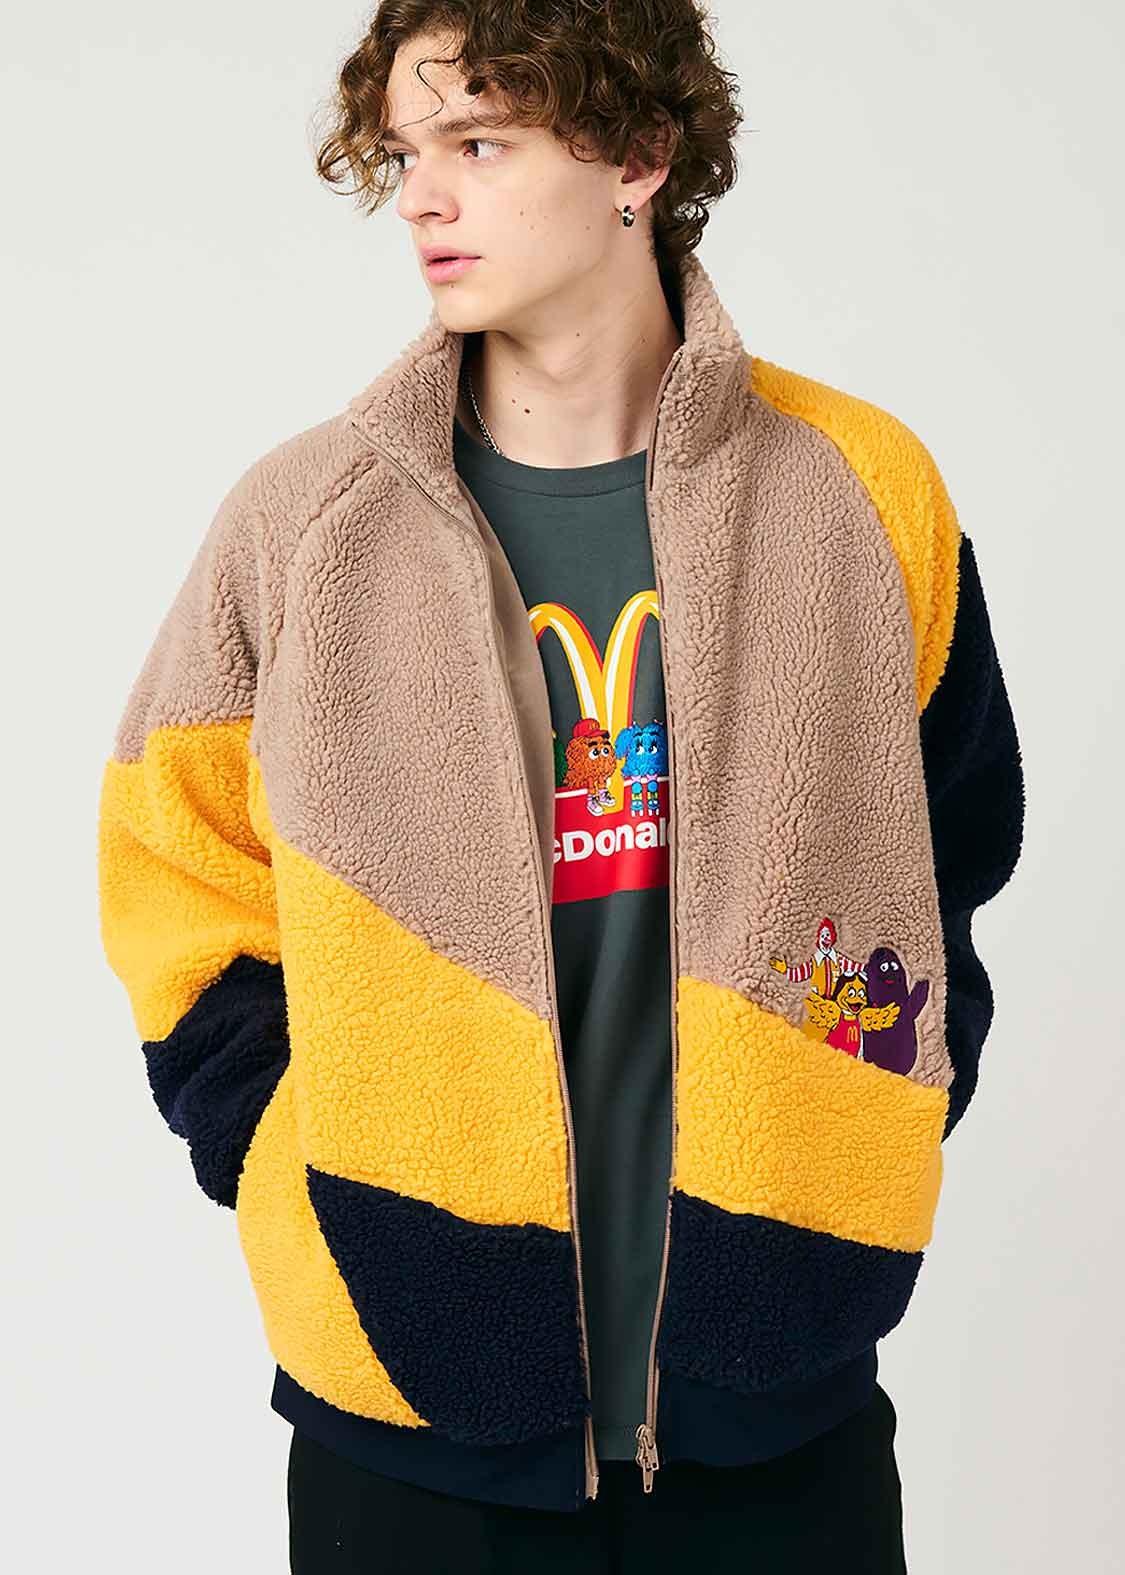 A model wears McDonald's x Graniph collaborative clothing & paper bag